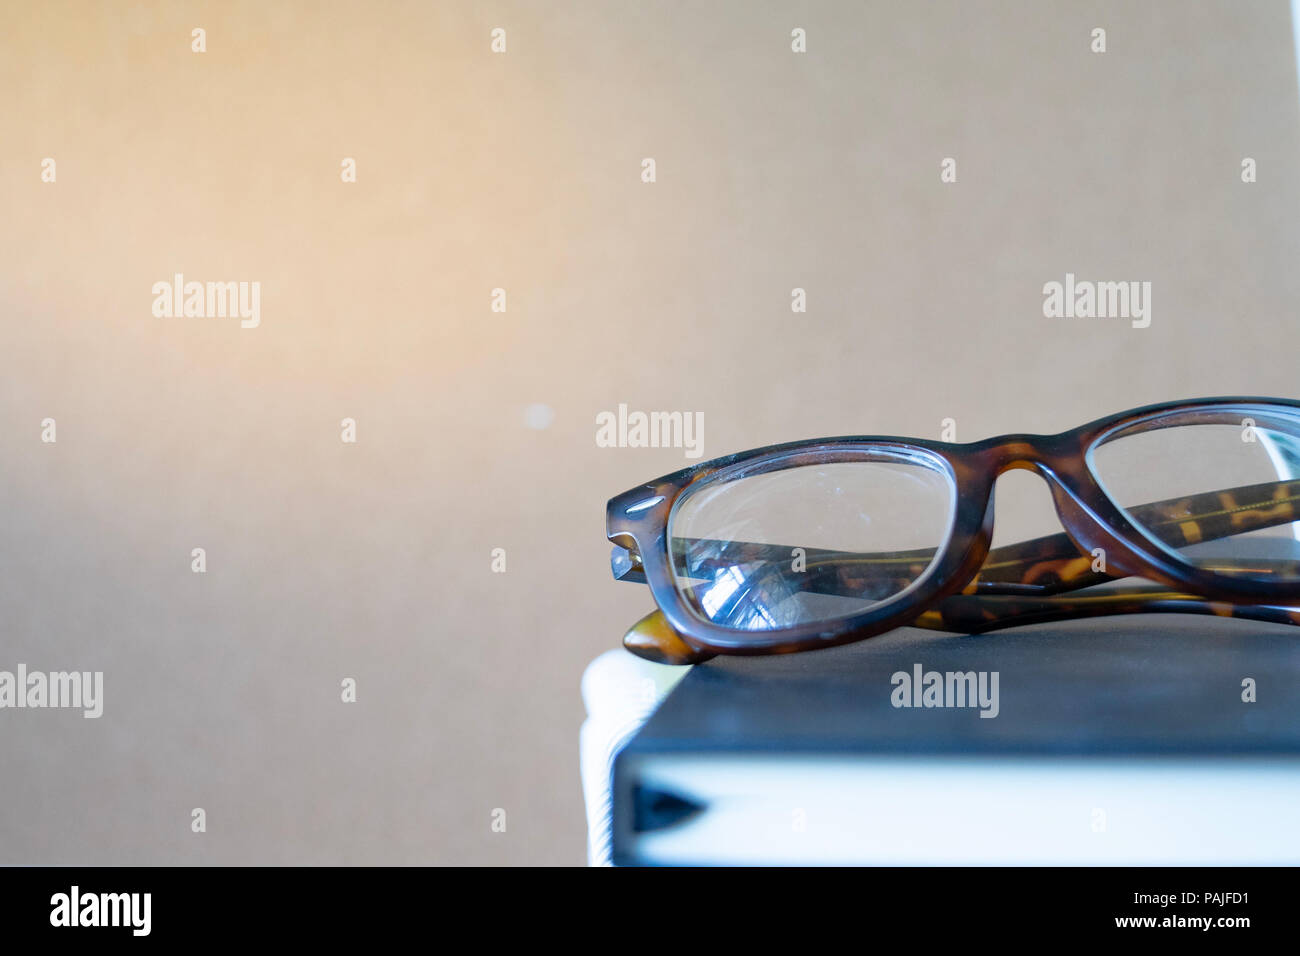 close up vintage glasses on blurred black book stack with copy space Stock Photo